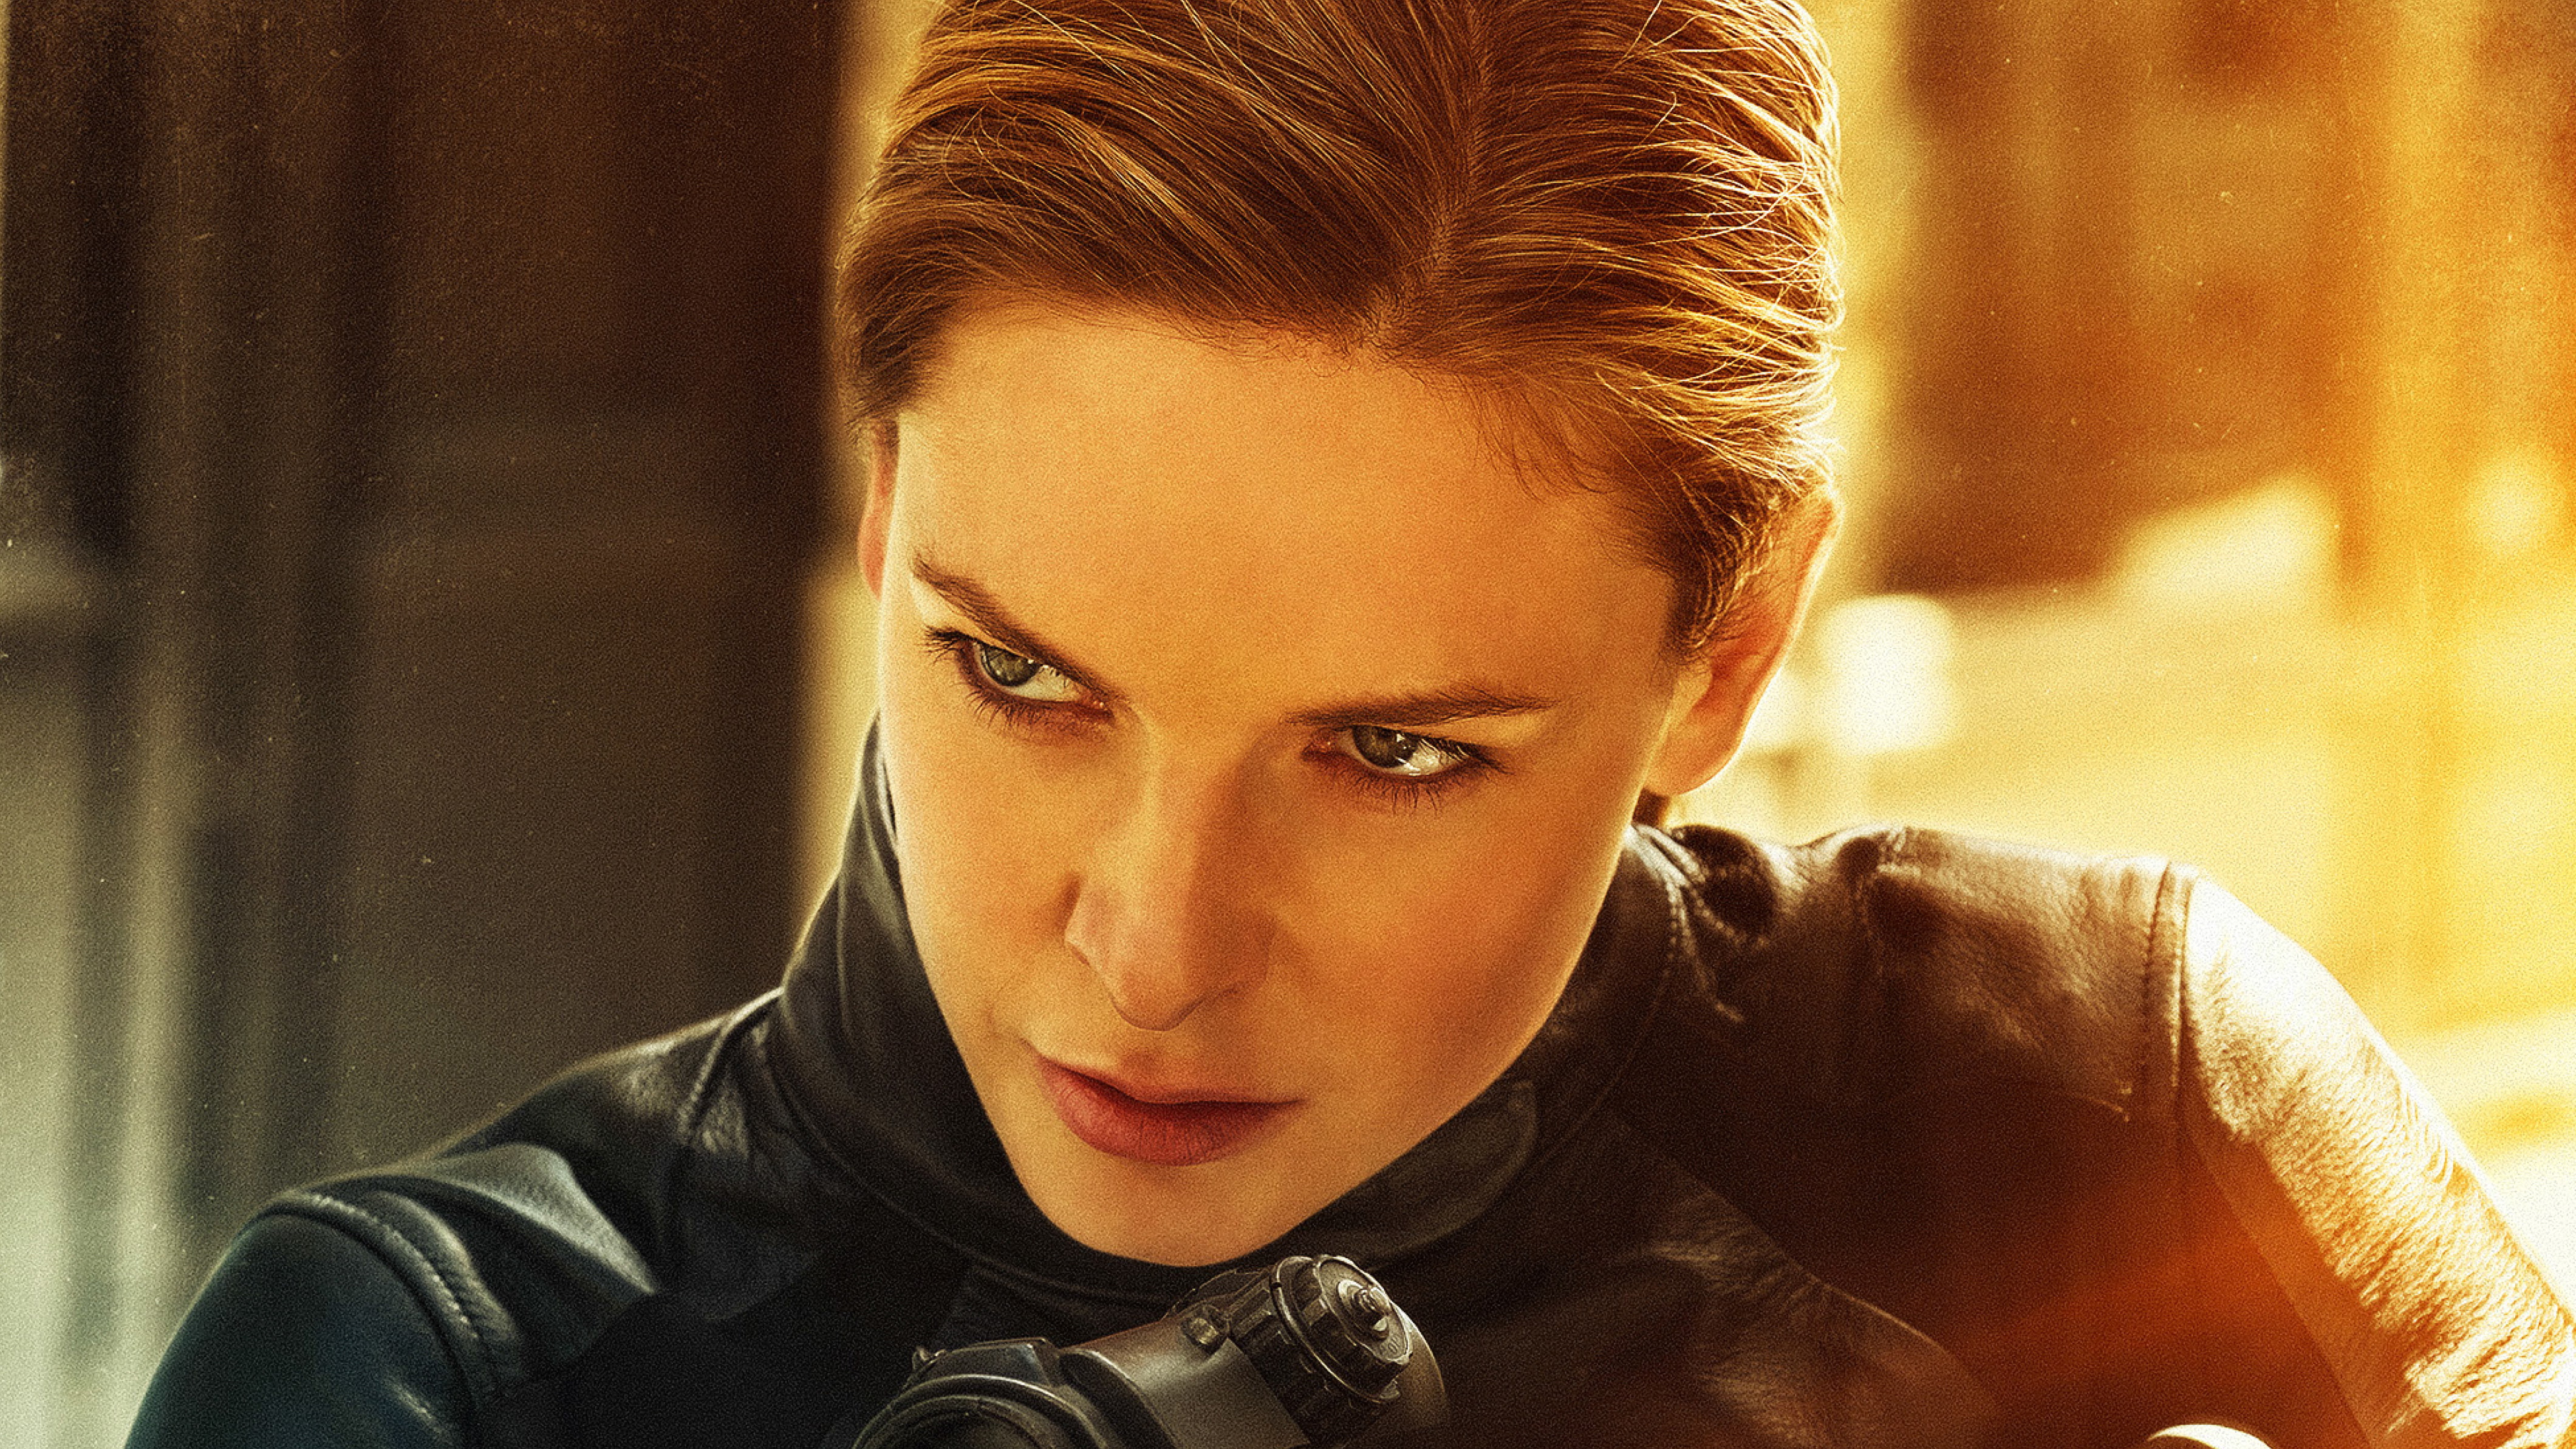 Mission Impossible Fallout Girl - HD Wallpaper 